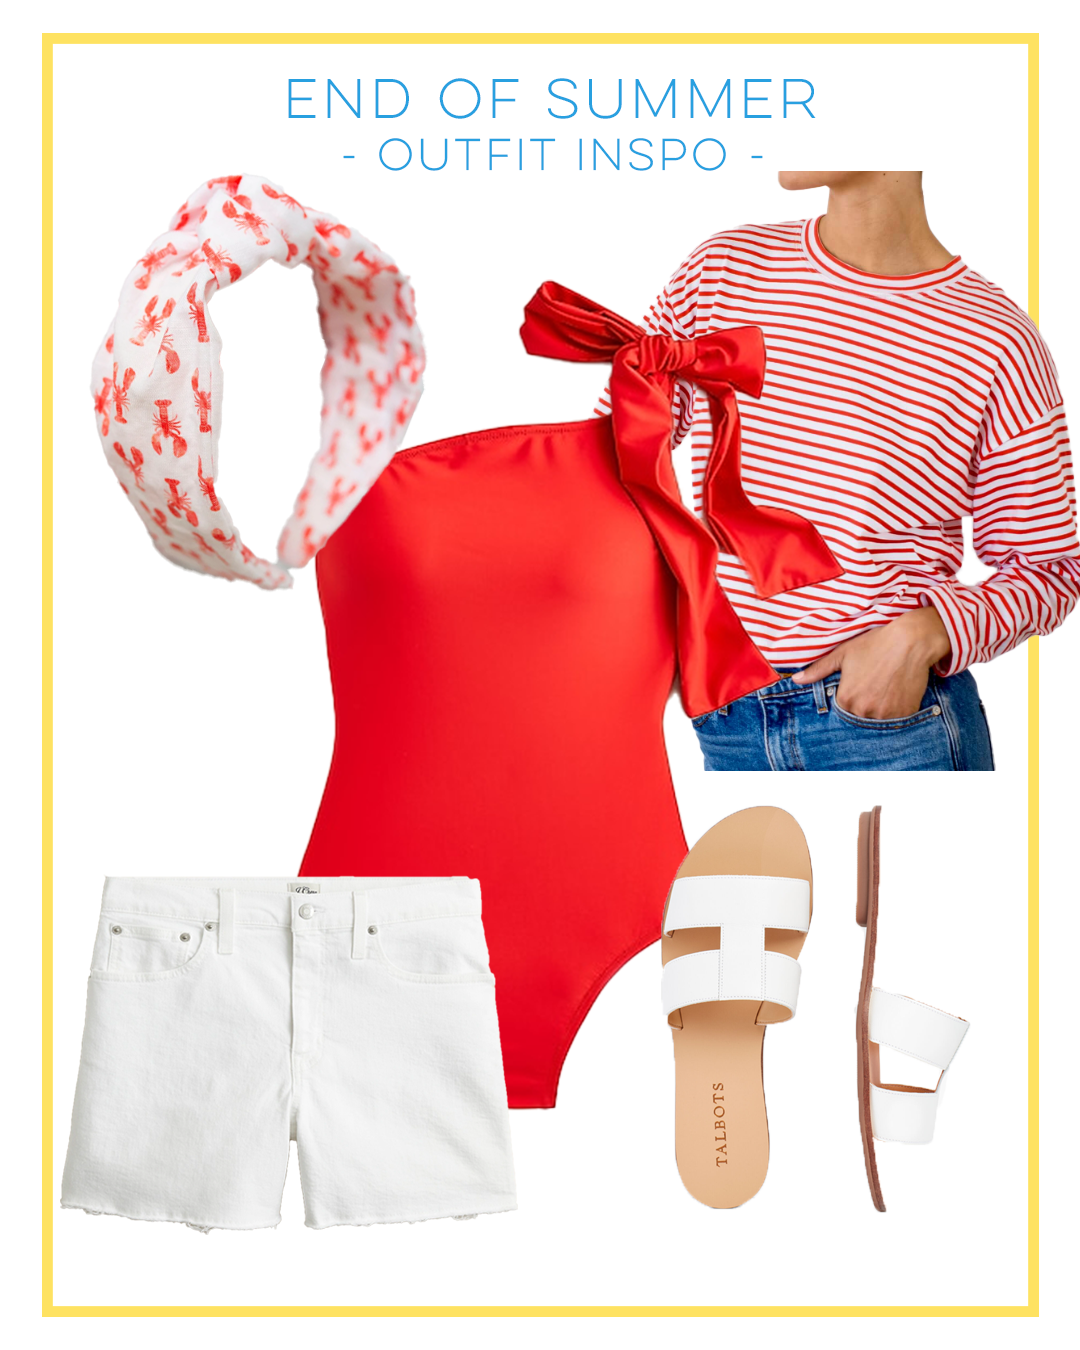 End of Summer Outfit Inspiration, Red and White Long Sleeve Striped Top, Red One Piece Swimsuit, White shorts, Sandals and a Lobster Headband 